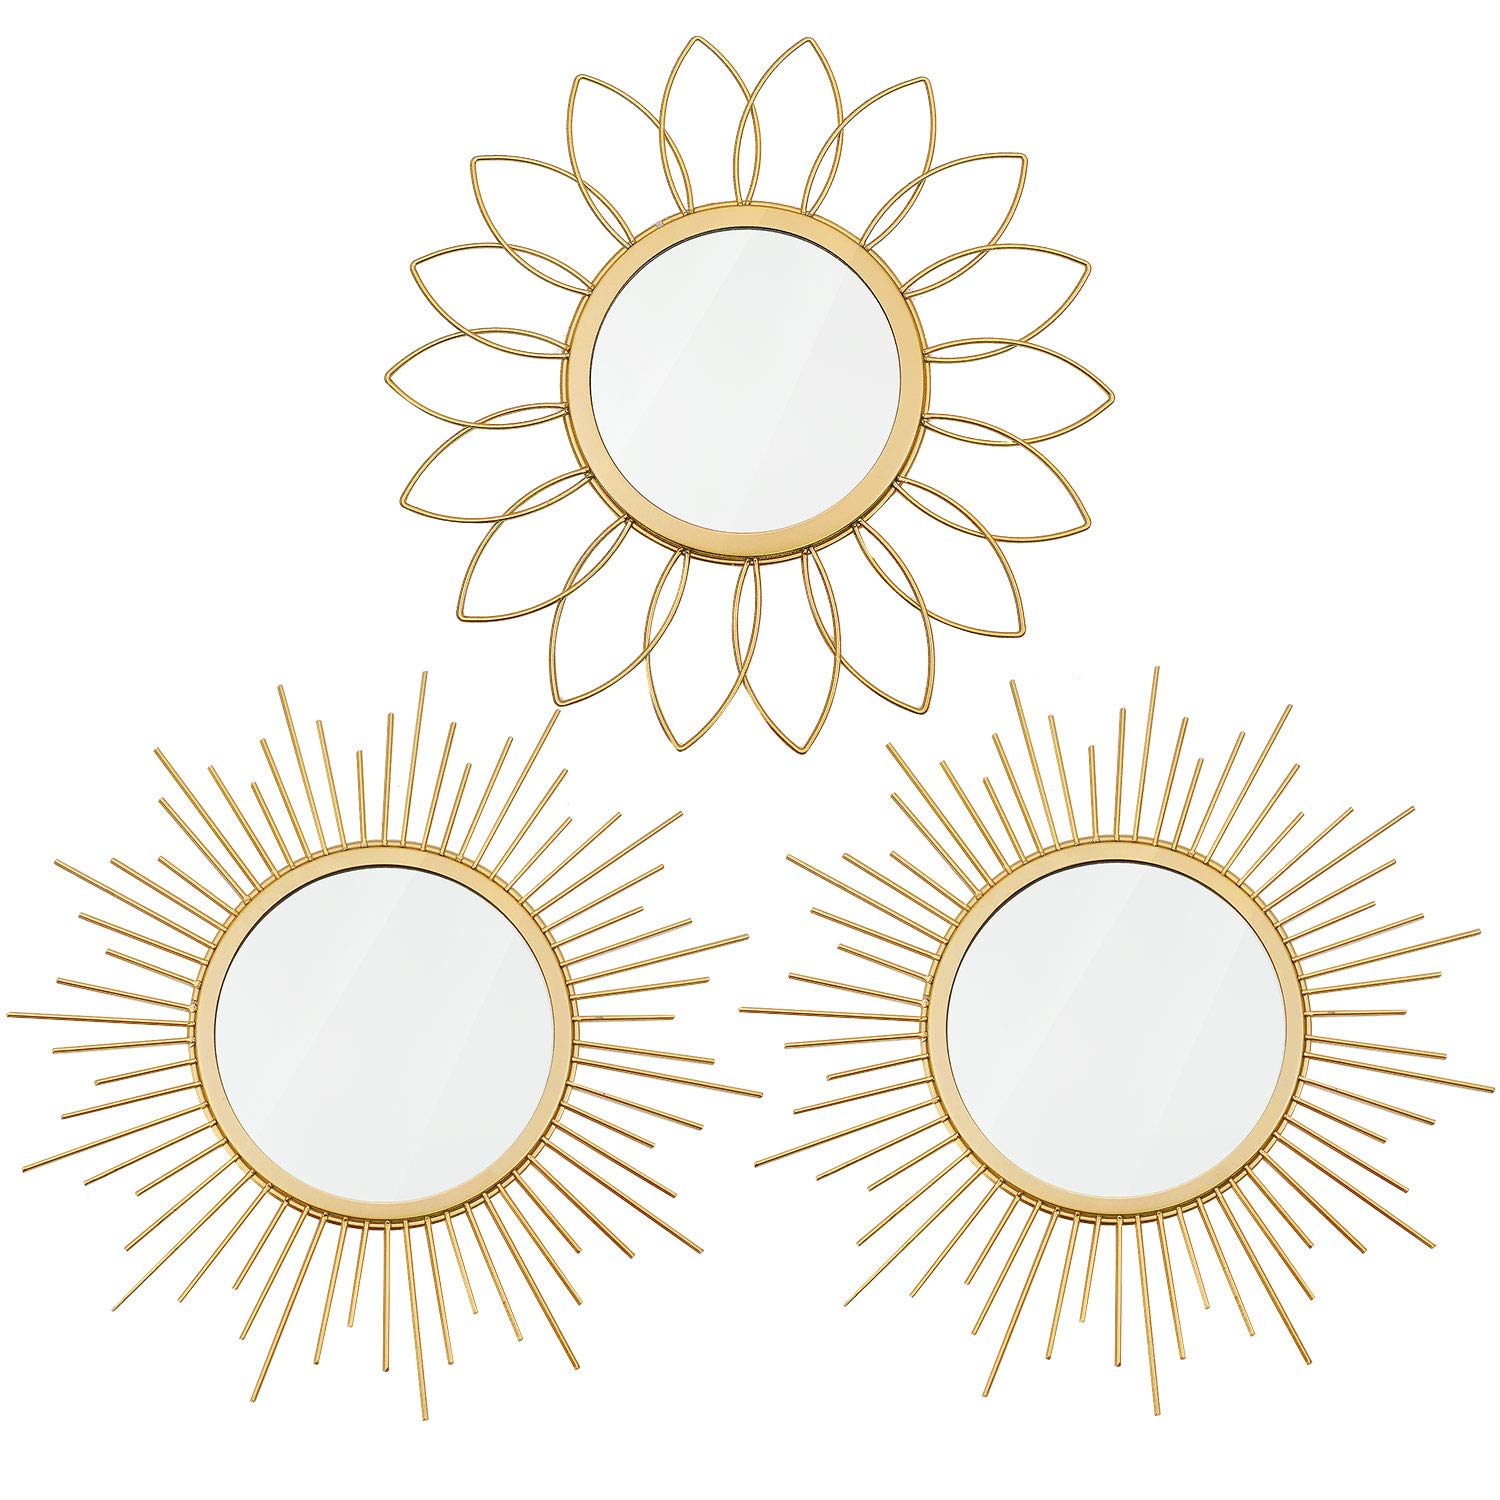 Decorative Gold Mirrors for Wall Metal Sunburst Home Décor Hanging Wall Art